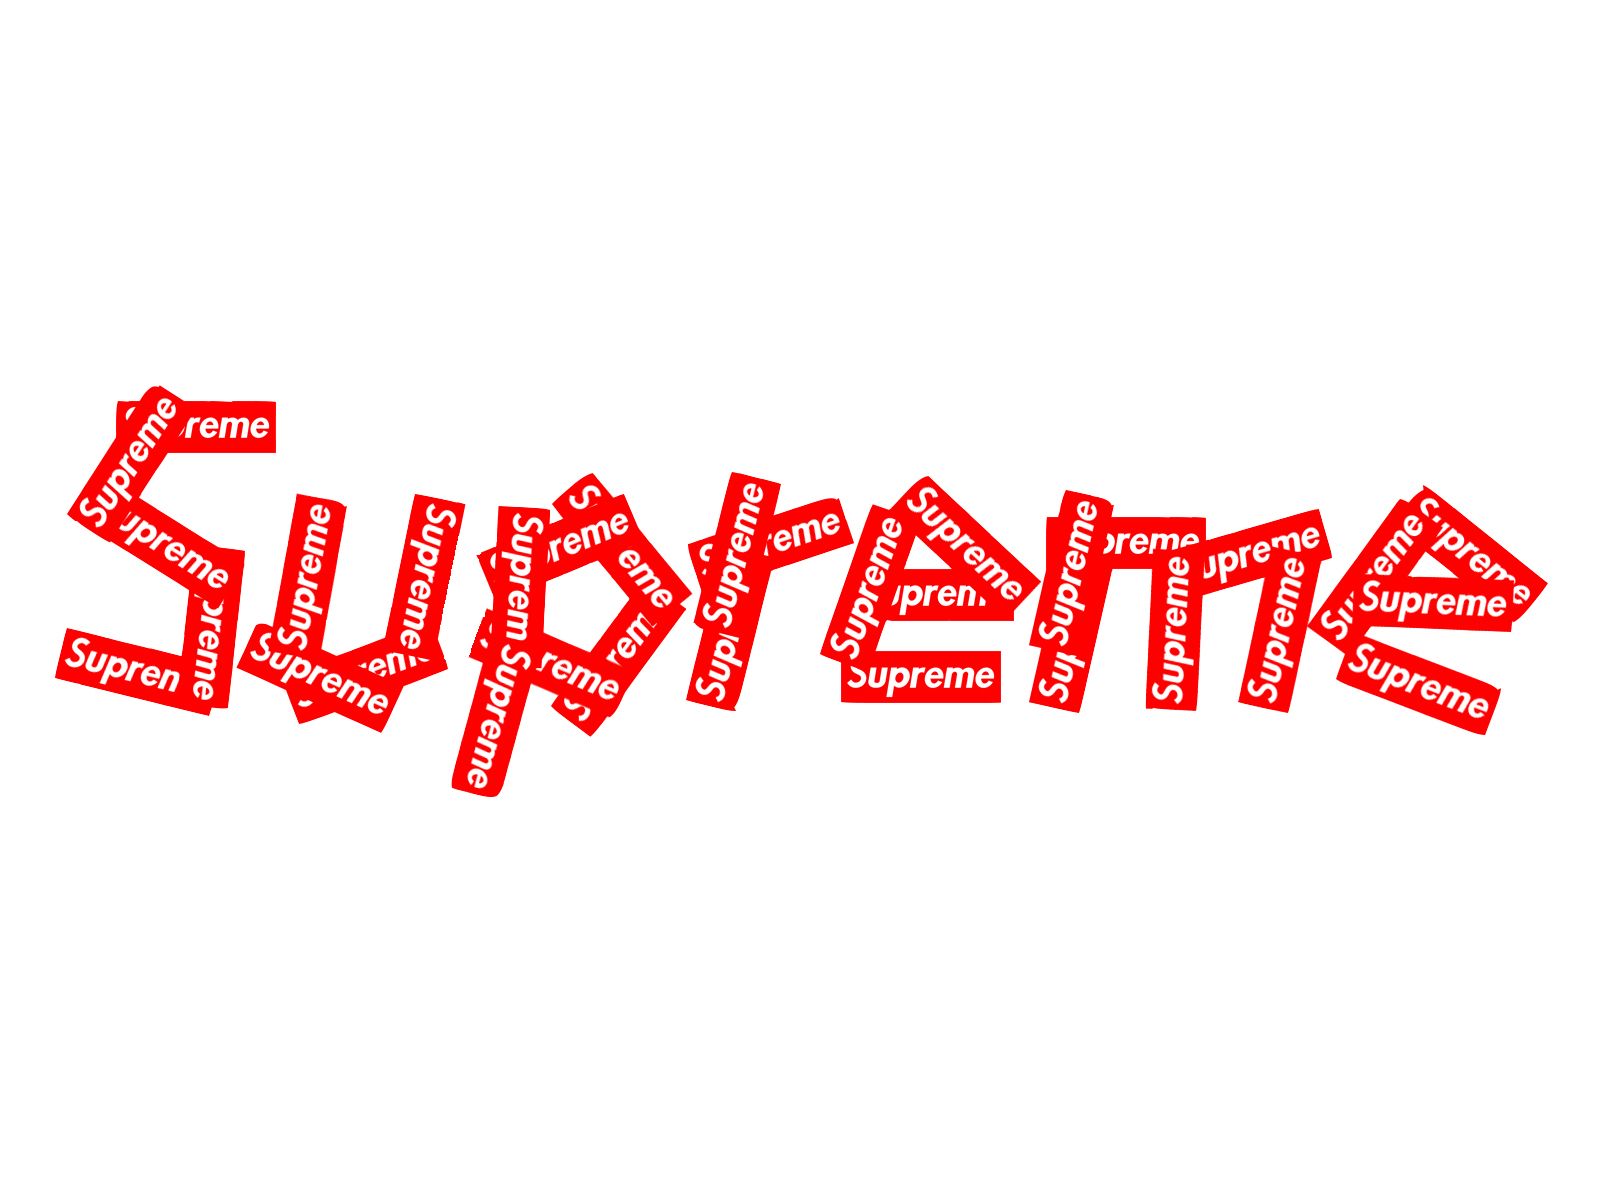 HD Supreme Wallpapers Live Supreme Wallpapers HY WP sup in 2019 1600x1200